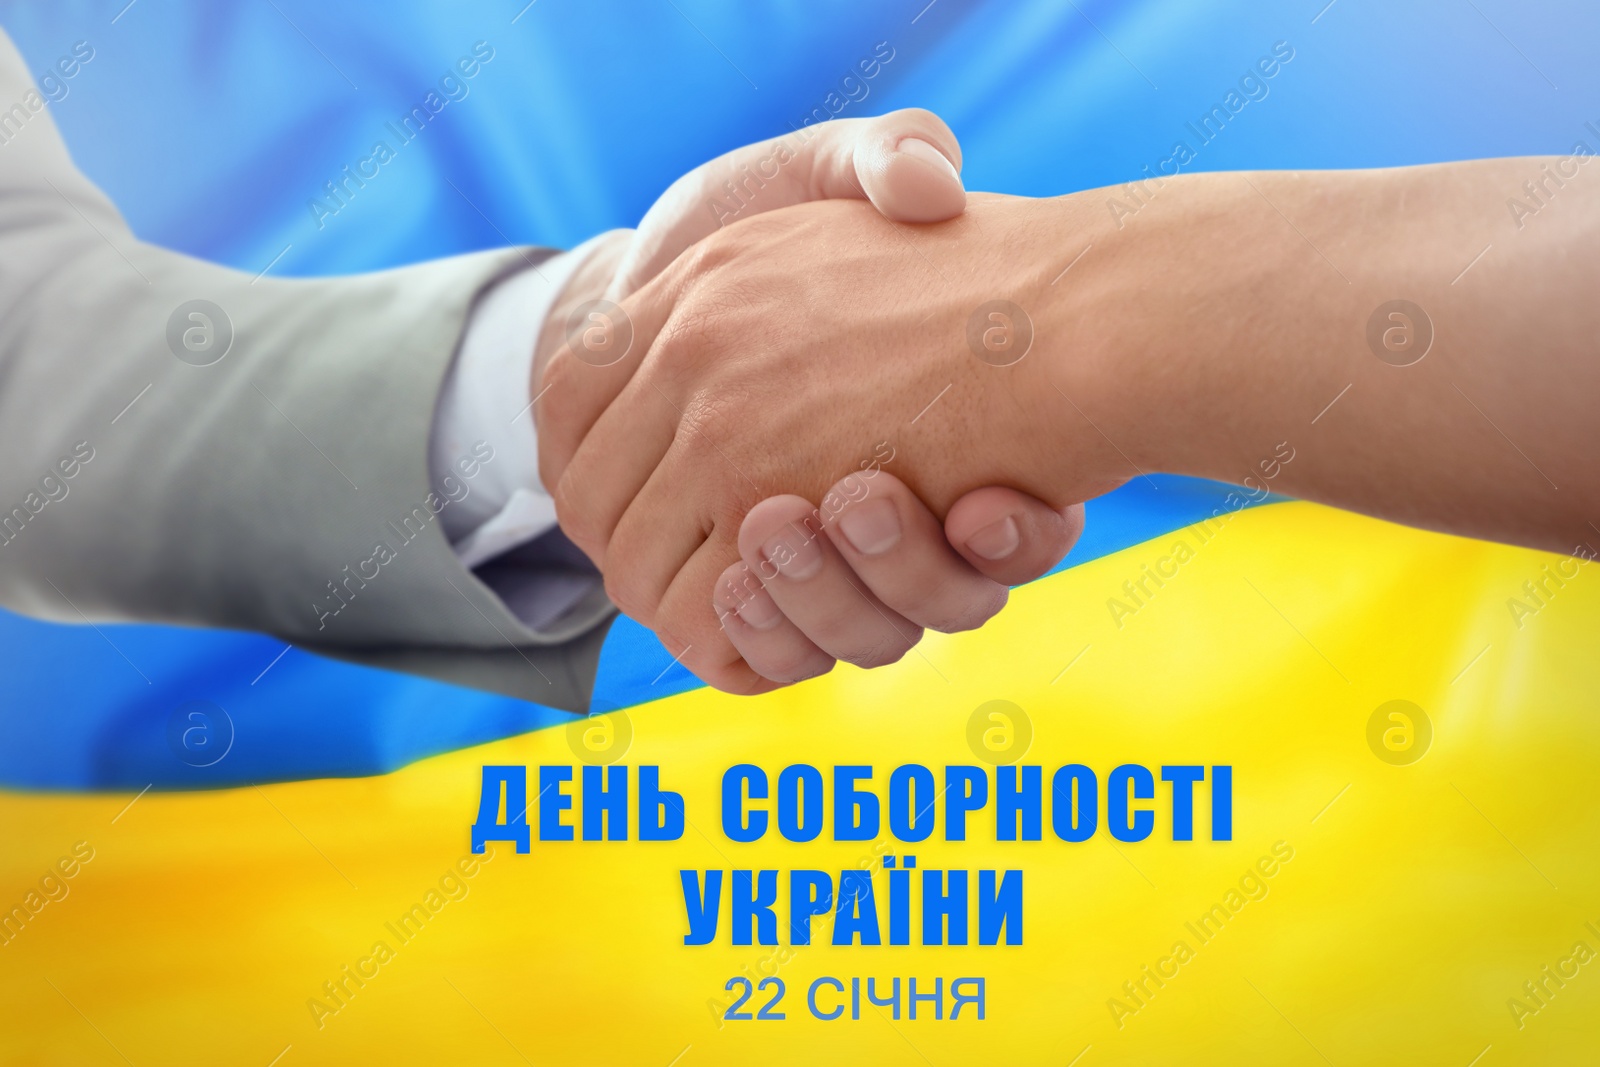 Image of Unity Day of Ukraine. People shaking hands, text written in Ukrainian and national flag on background